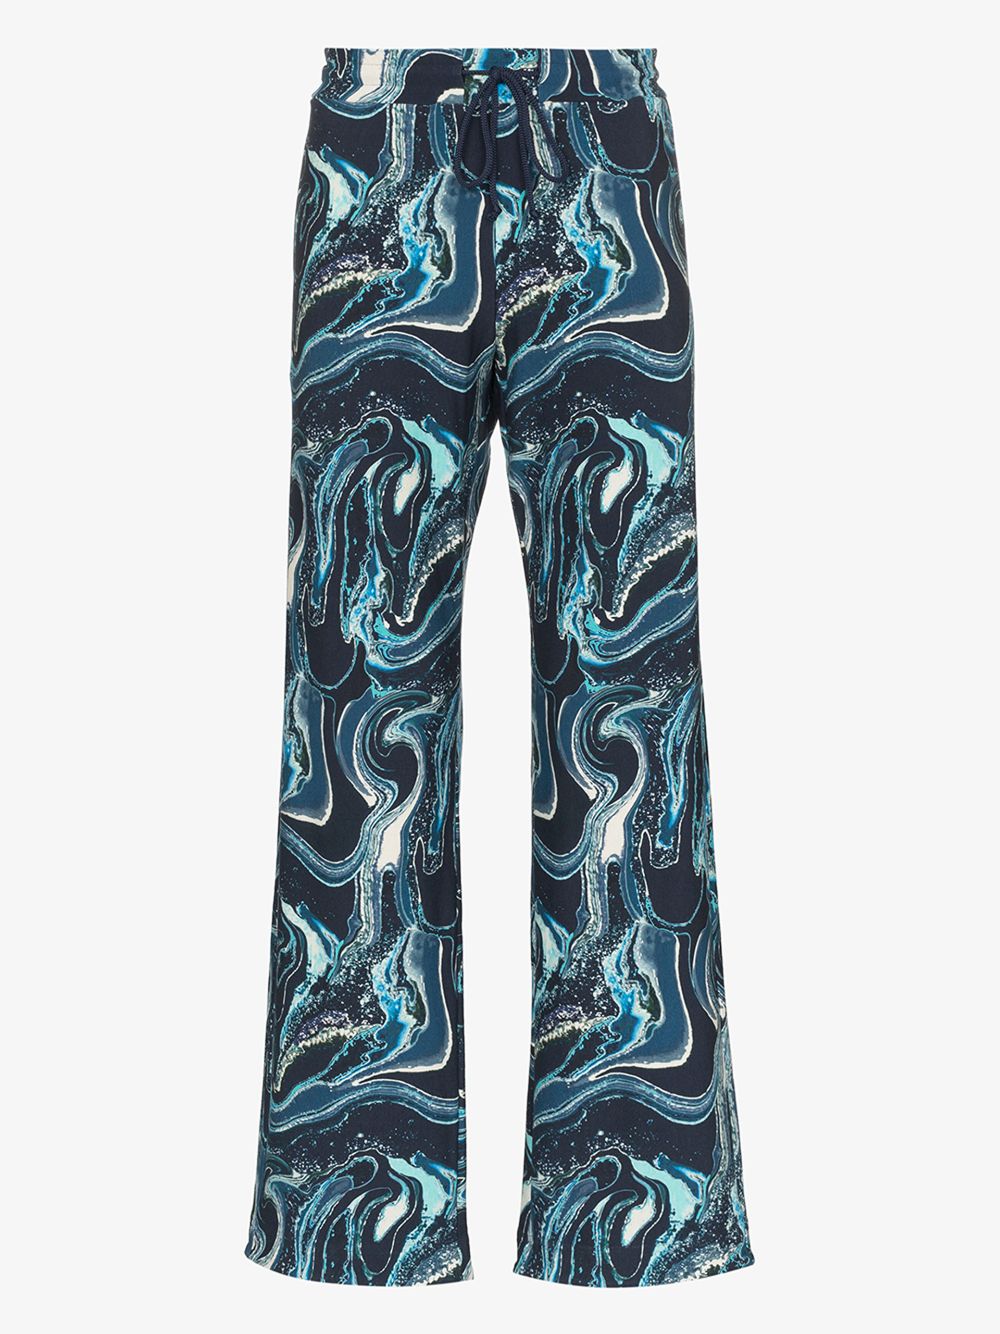 CANESSA DYLAN PRINTED DRAWSTRING TROUSERS,BMRP003TV0002S2214317599